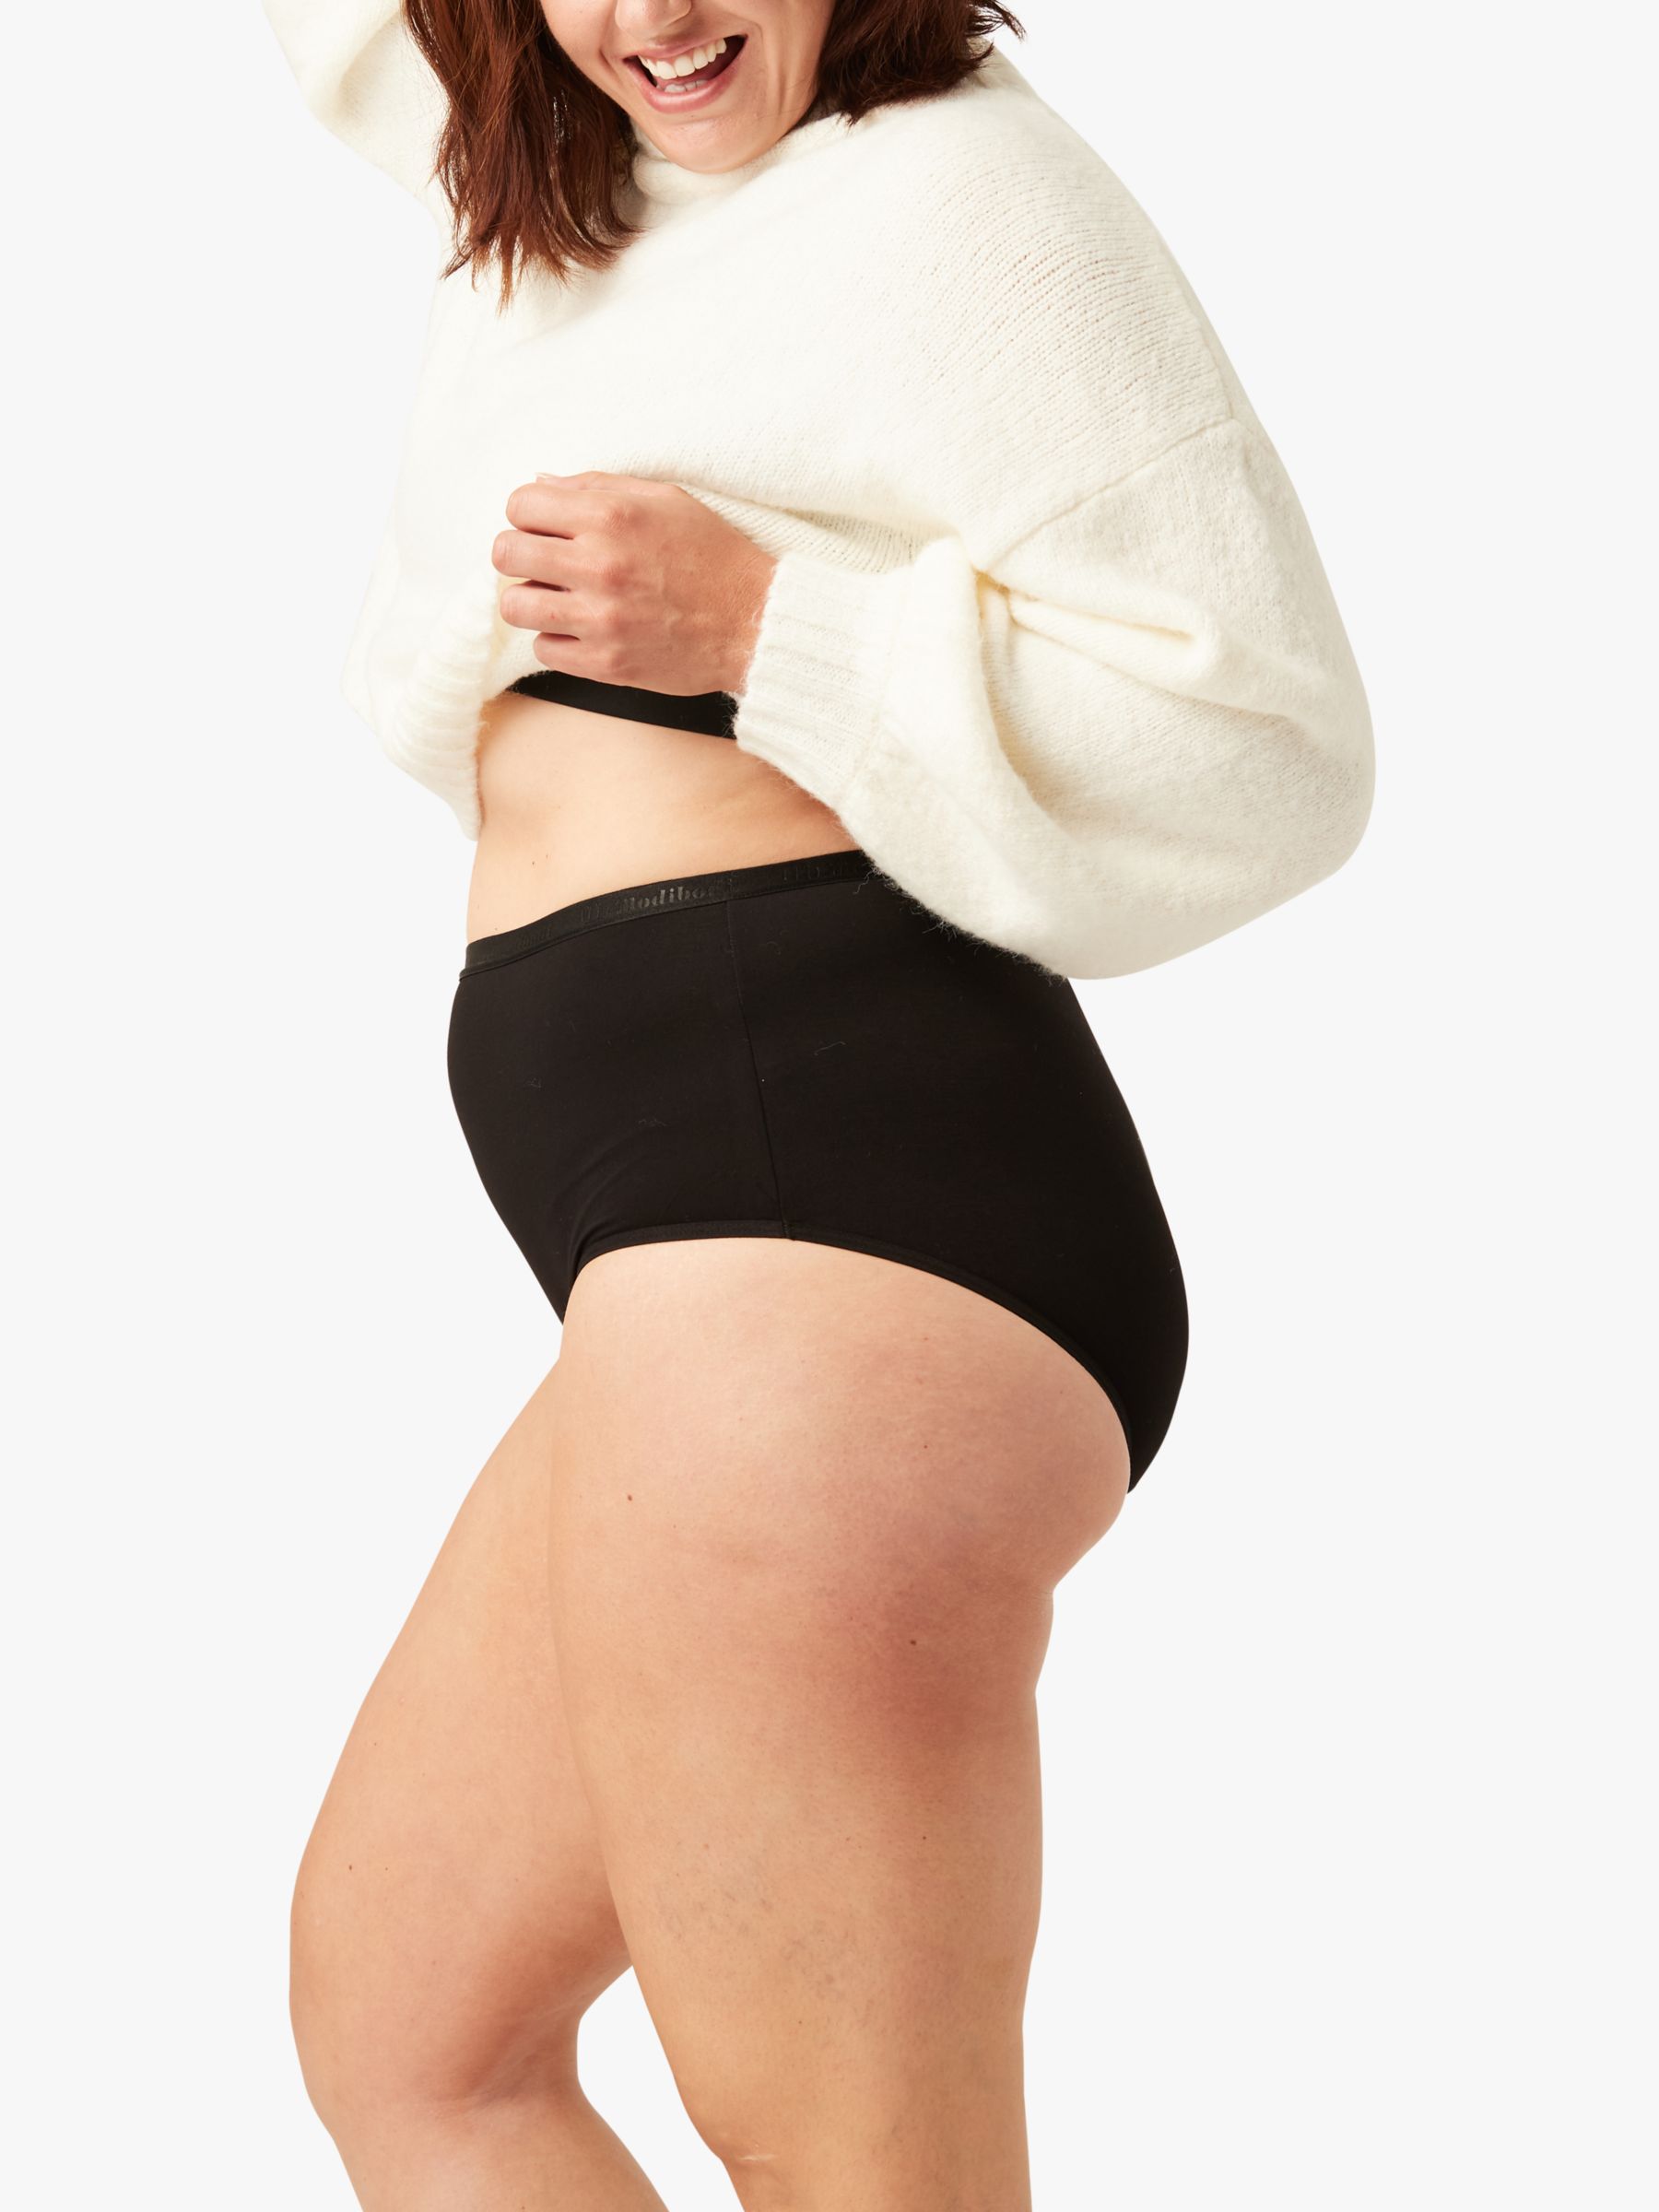 Buy Modibodi Classic Full Brief Moderate to Heavy Absorbency Knickers, Black Online at johnlewis.com